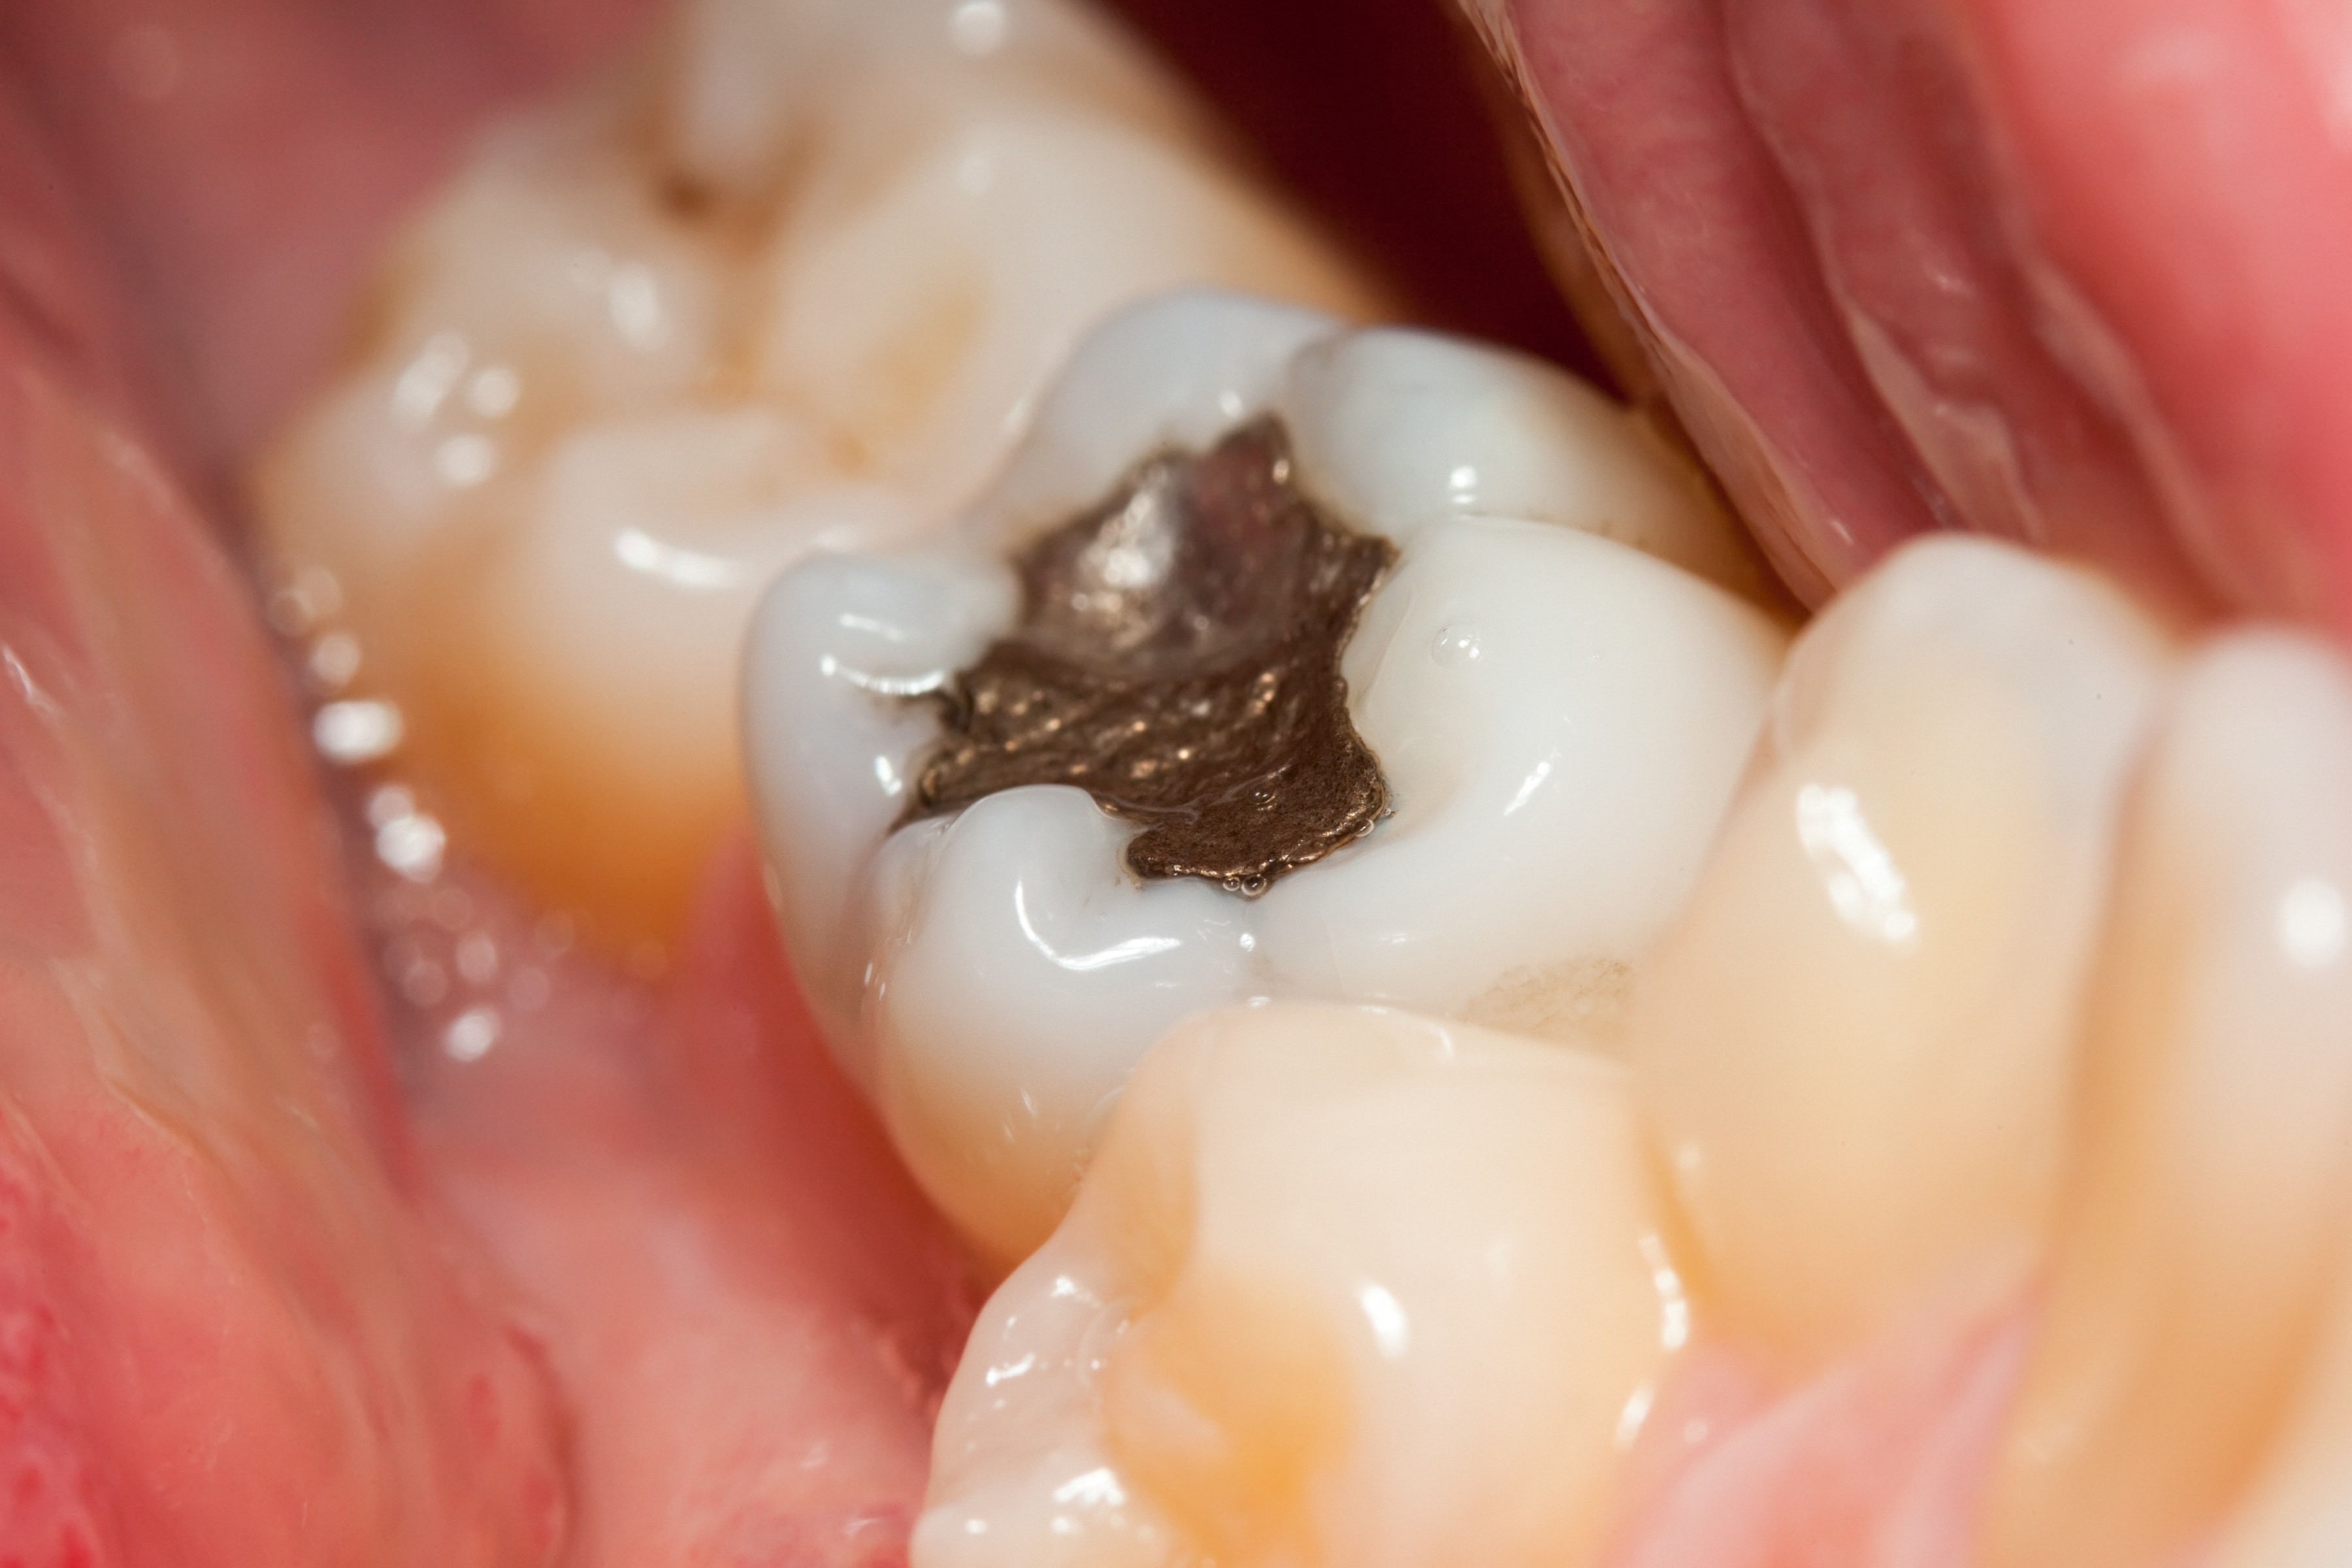 What Does Filling Mean in Dentistry? 